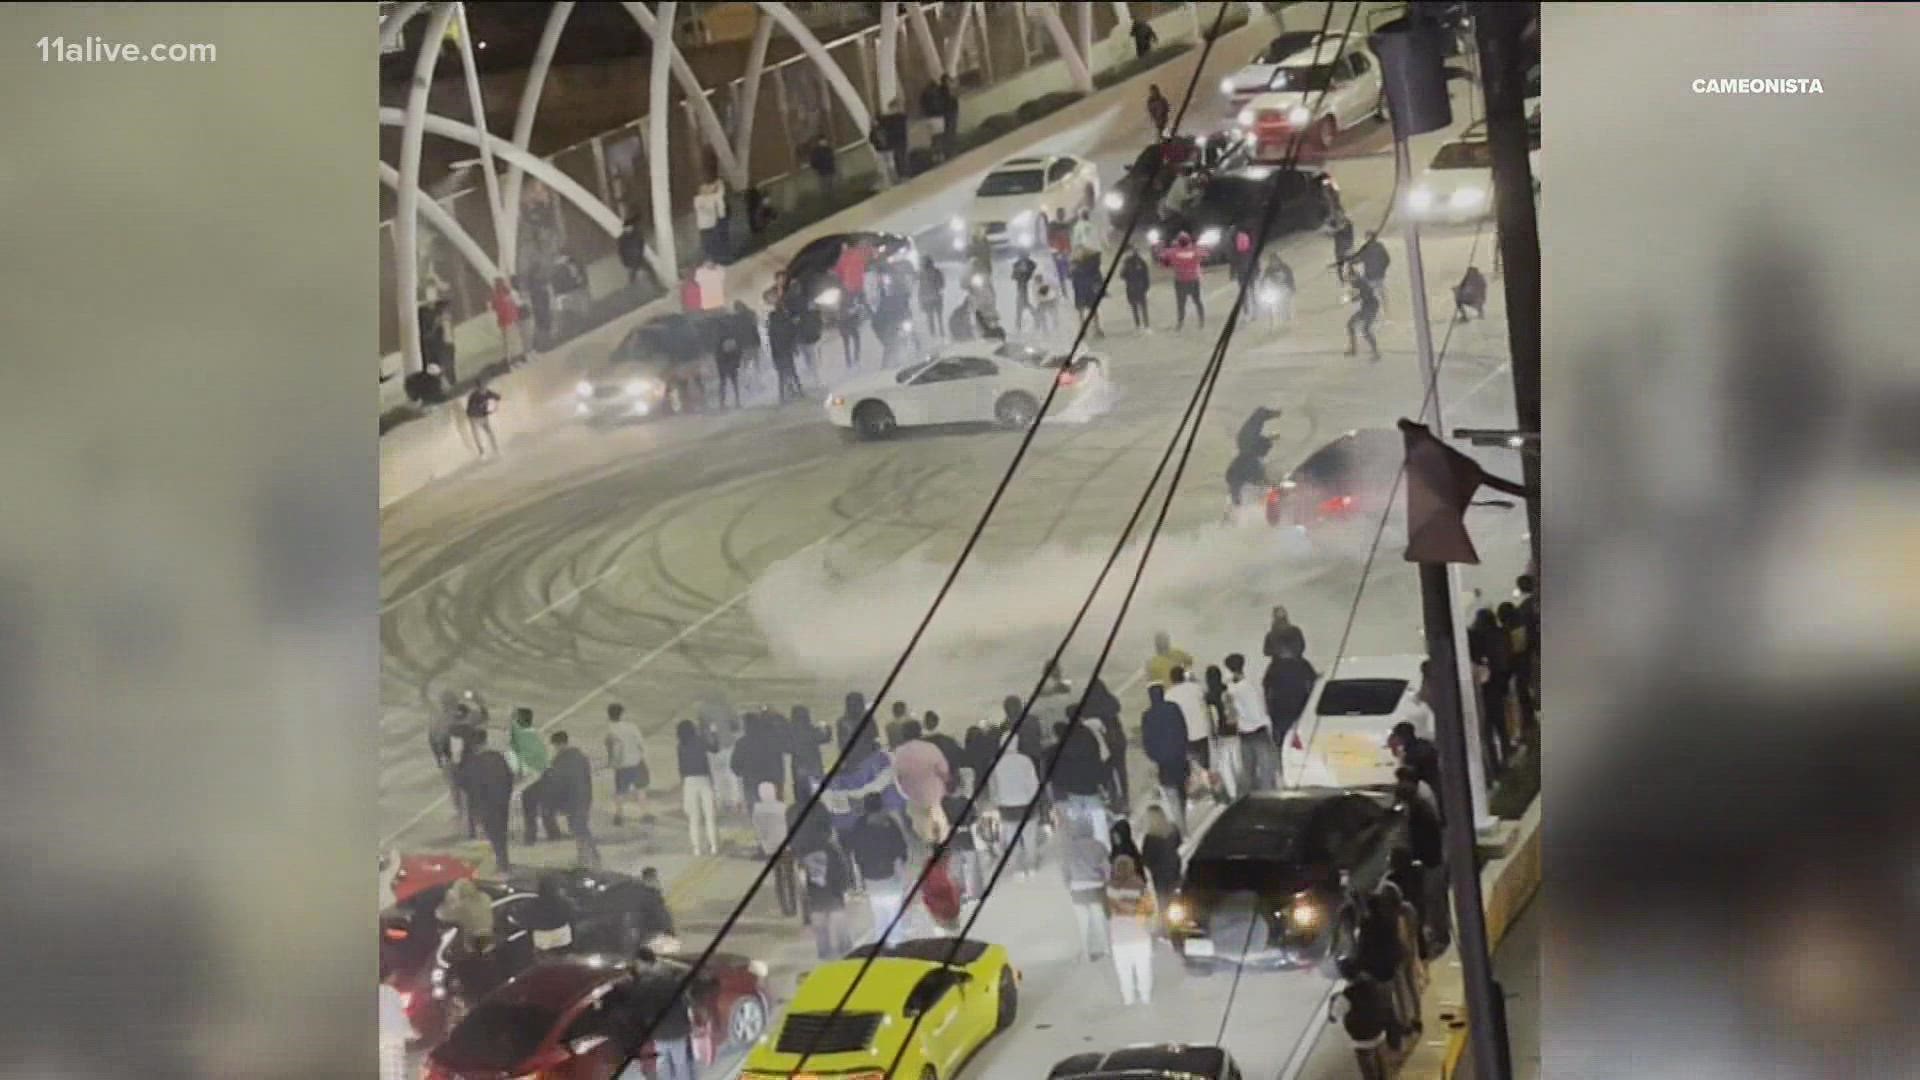 A group of people took over a major Atlanta bridge over the weekend.